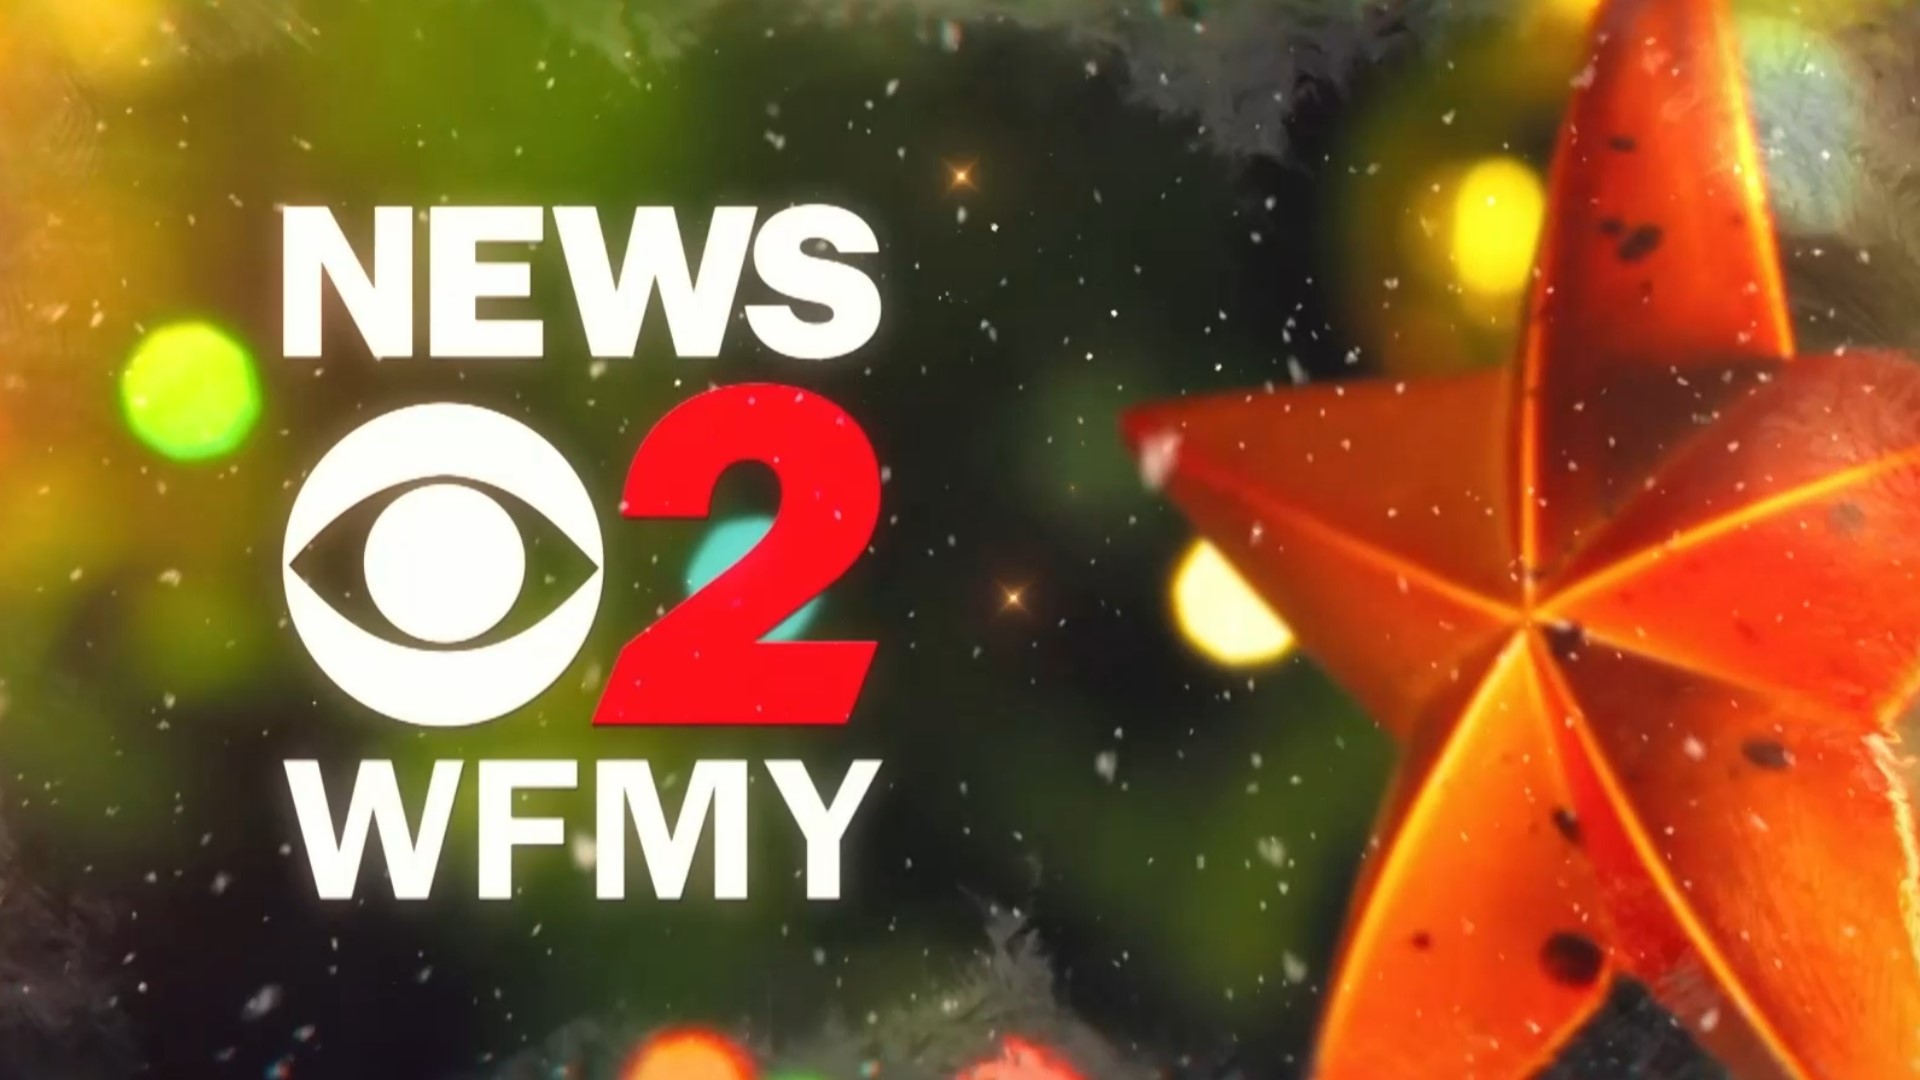 Merry Christmas and Happy New Year from WFMY News 2!